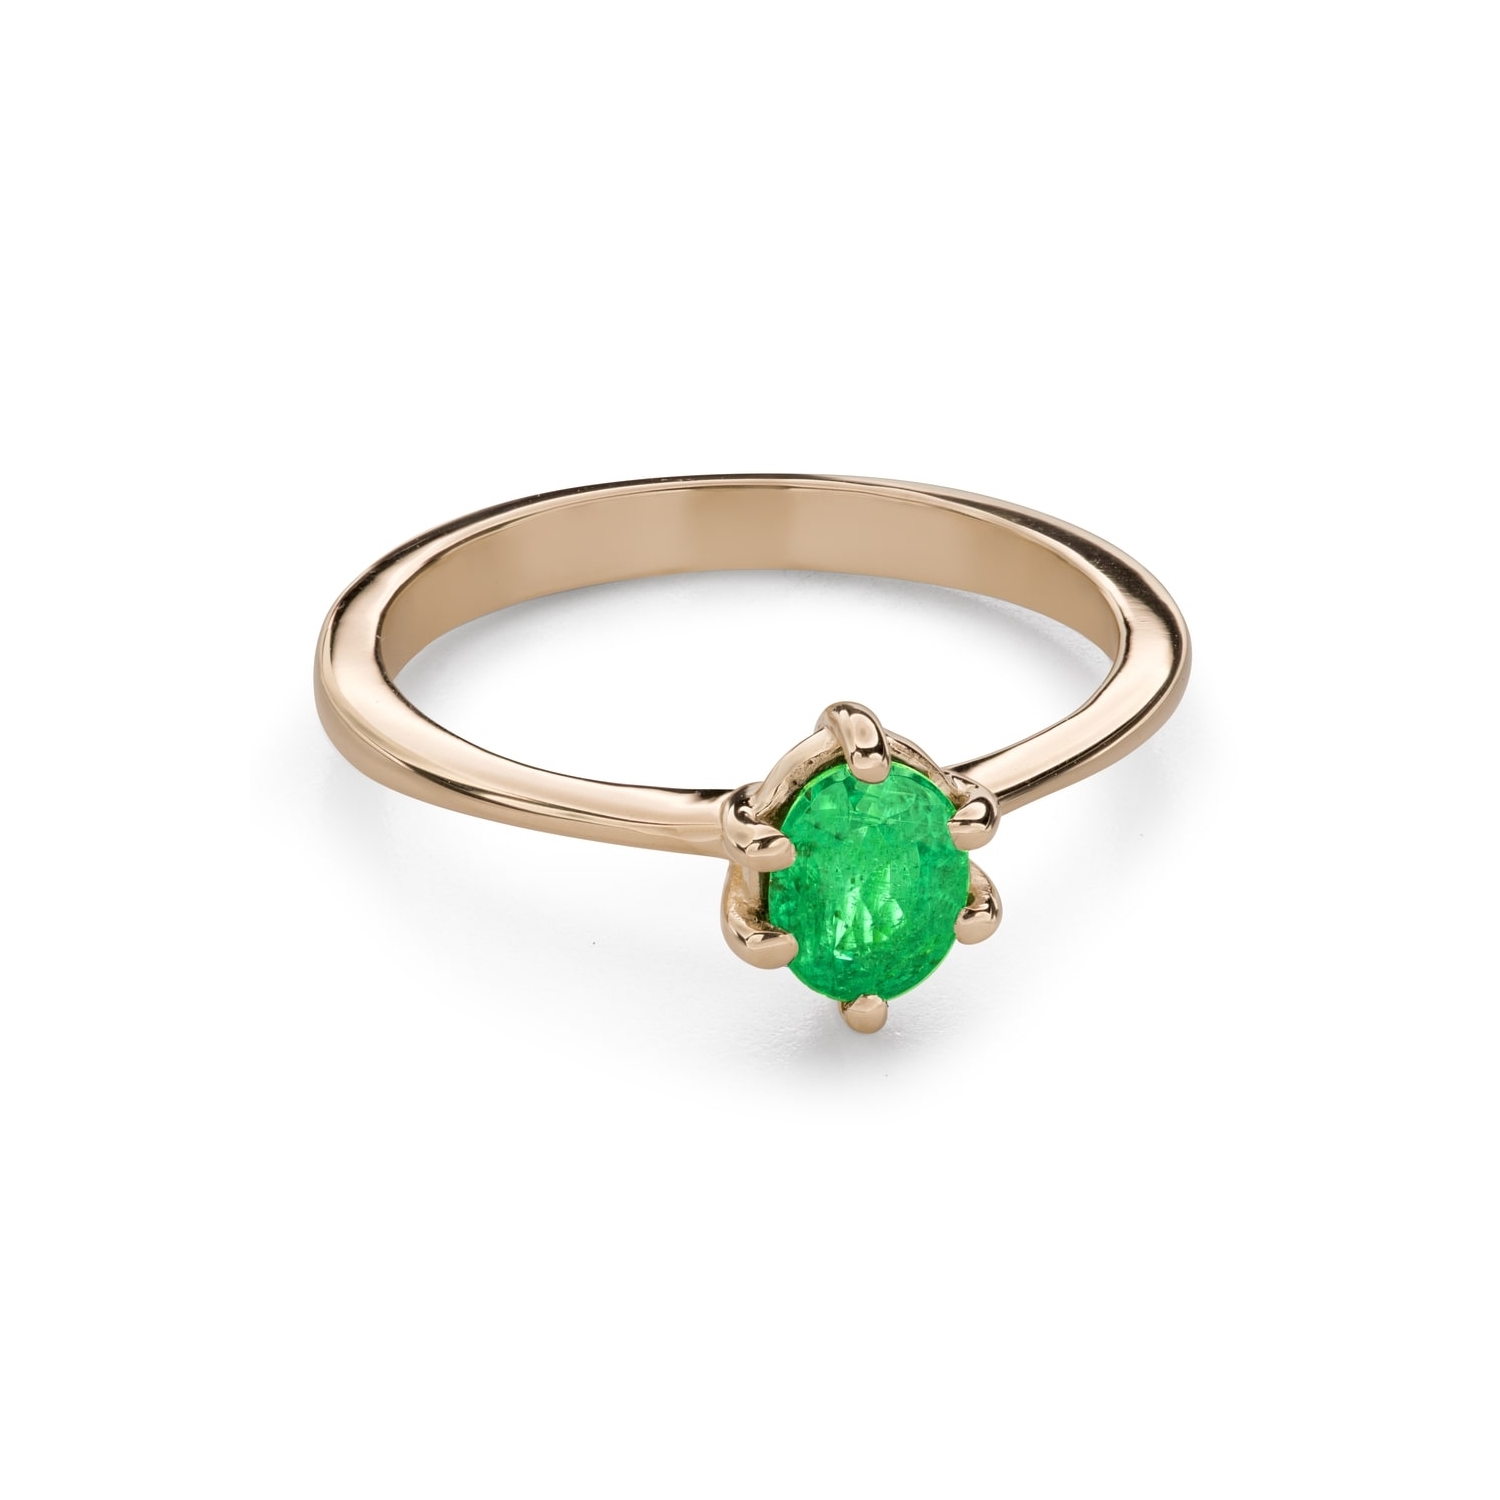 Engagement ring with gemstones "Emerald 39"